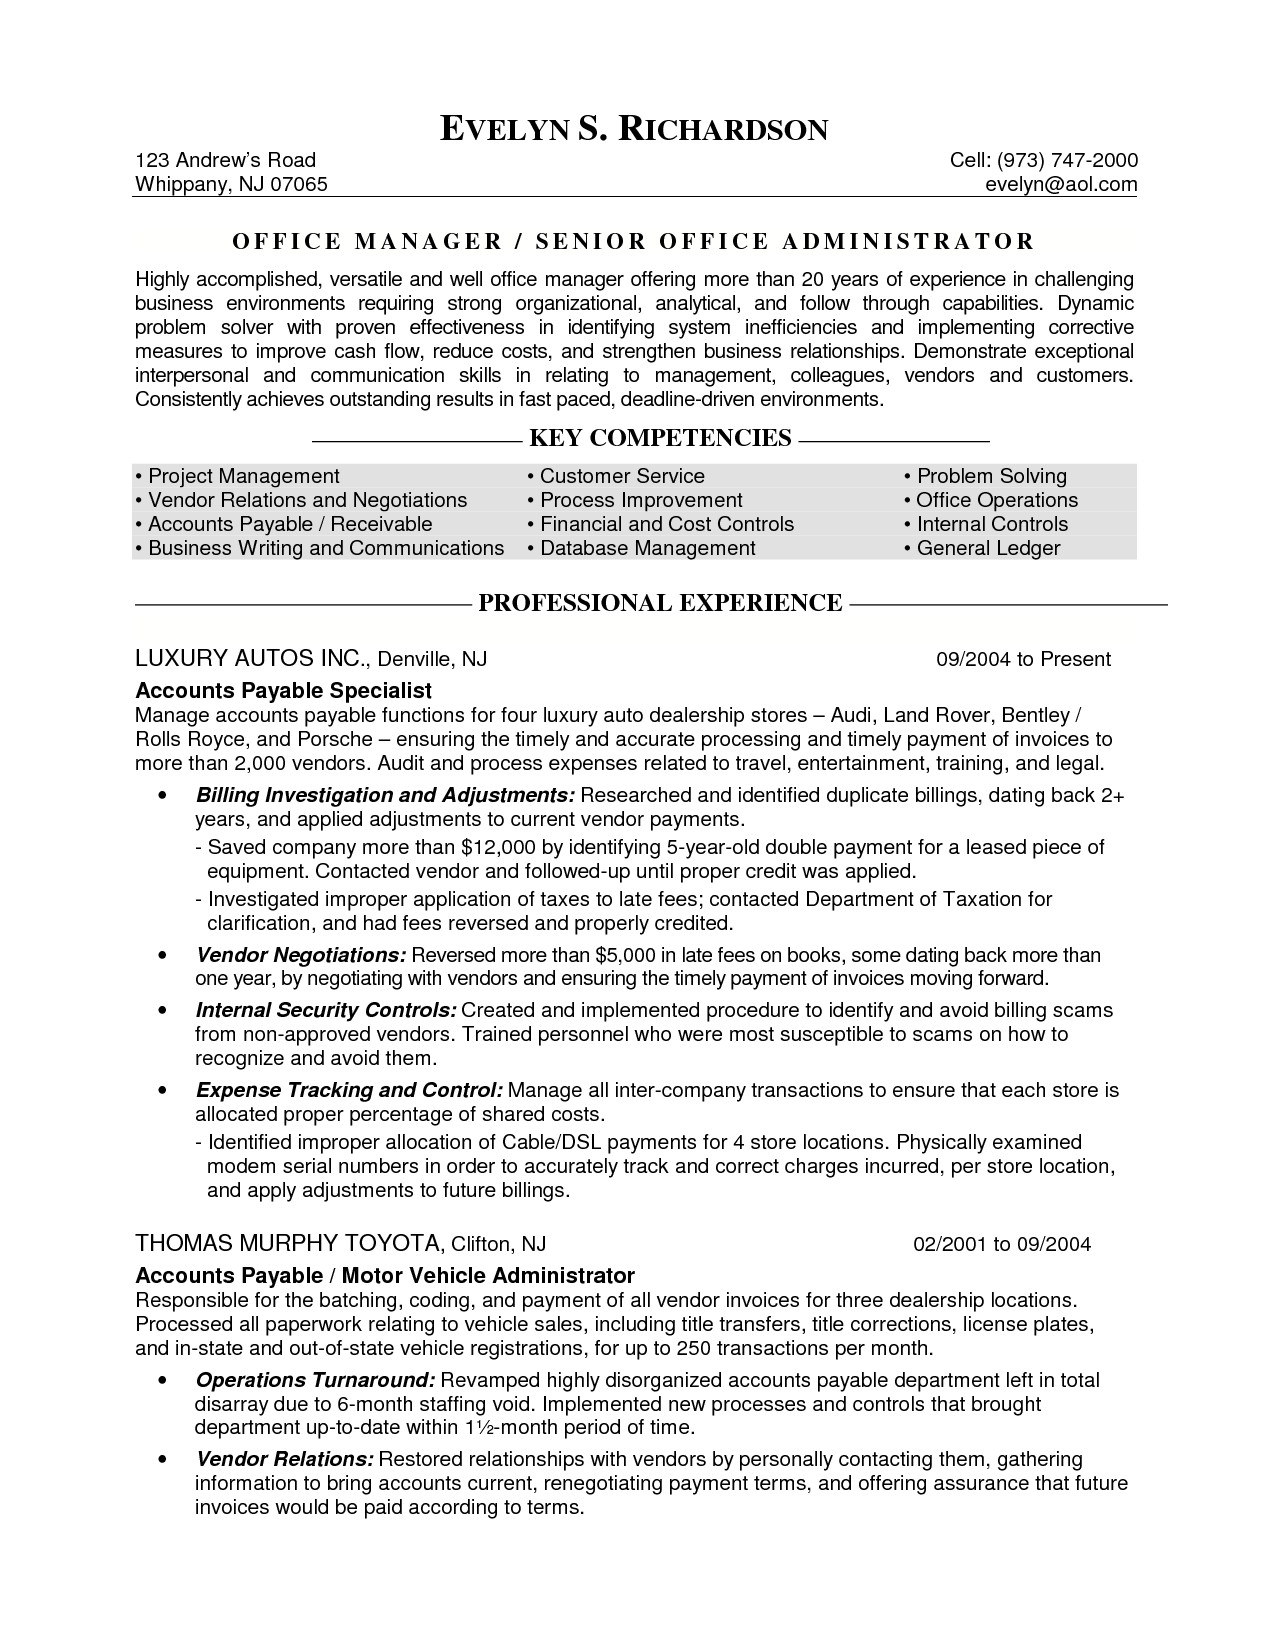 Sample Resume Objectives for Management Position Director Operations Resume Objectives